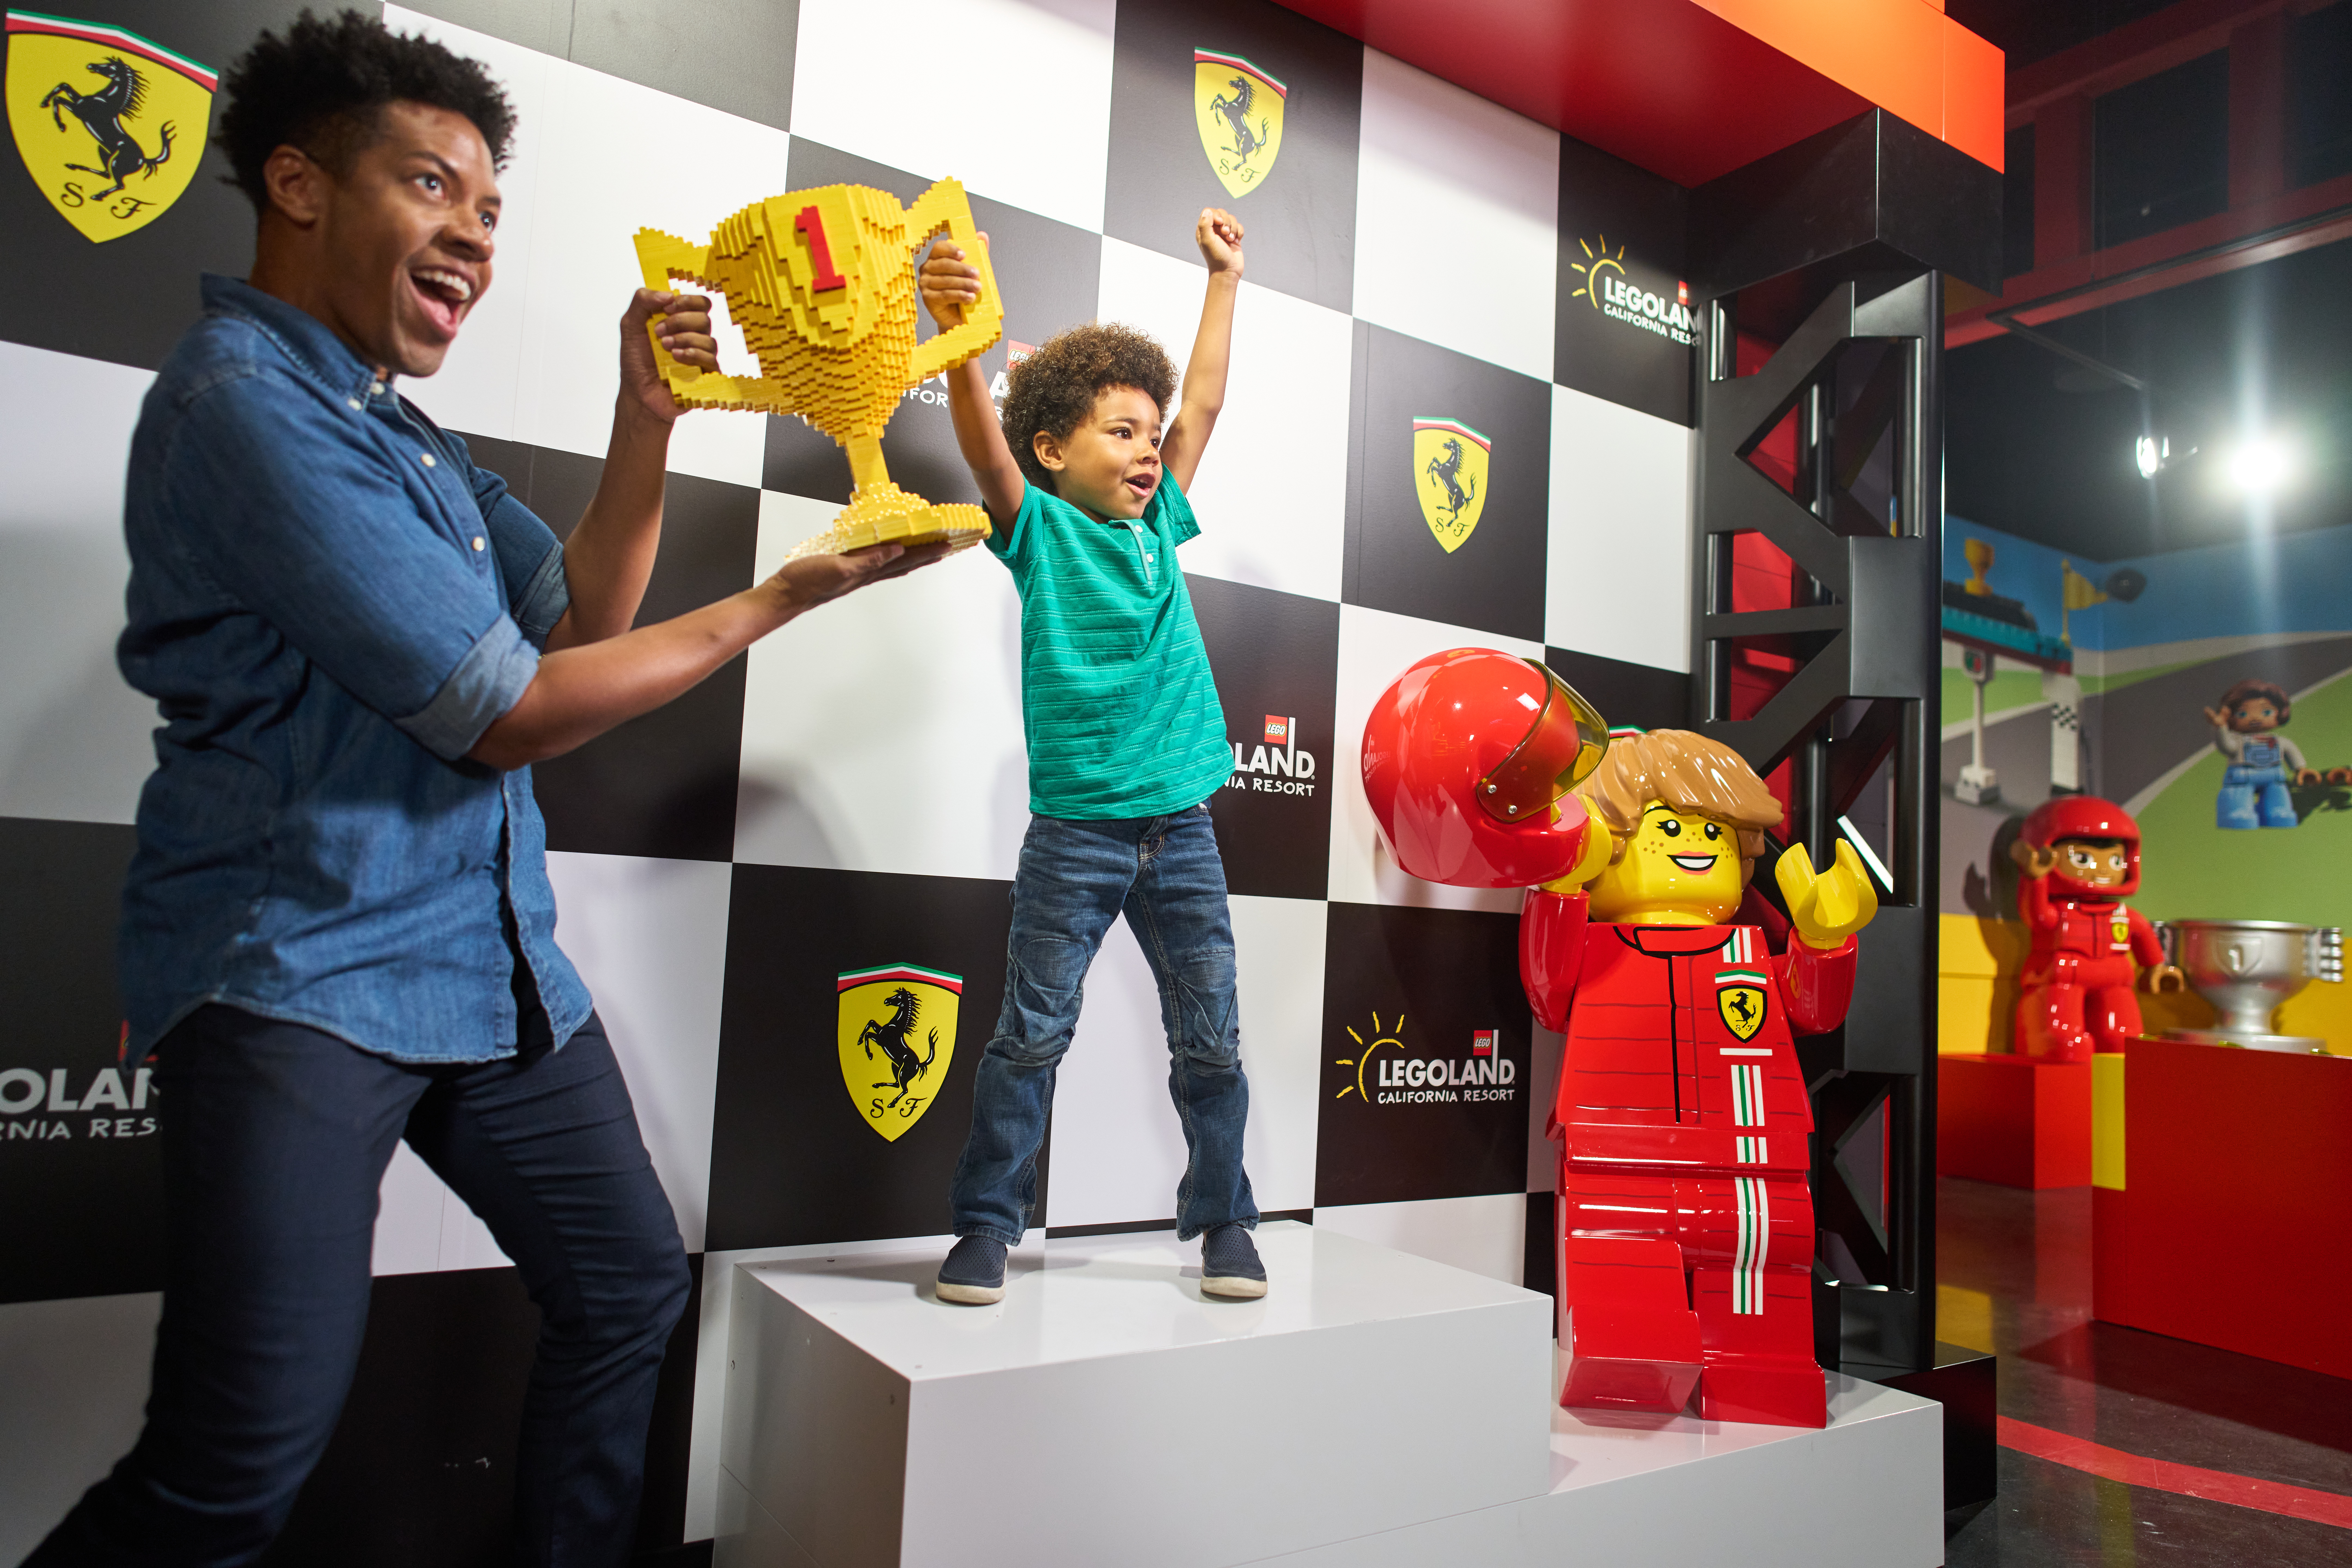 Father & Son holding LEGO Trophy at Ferrari Build and Race